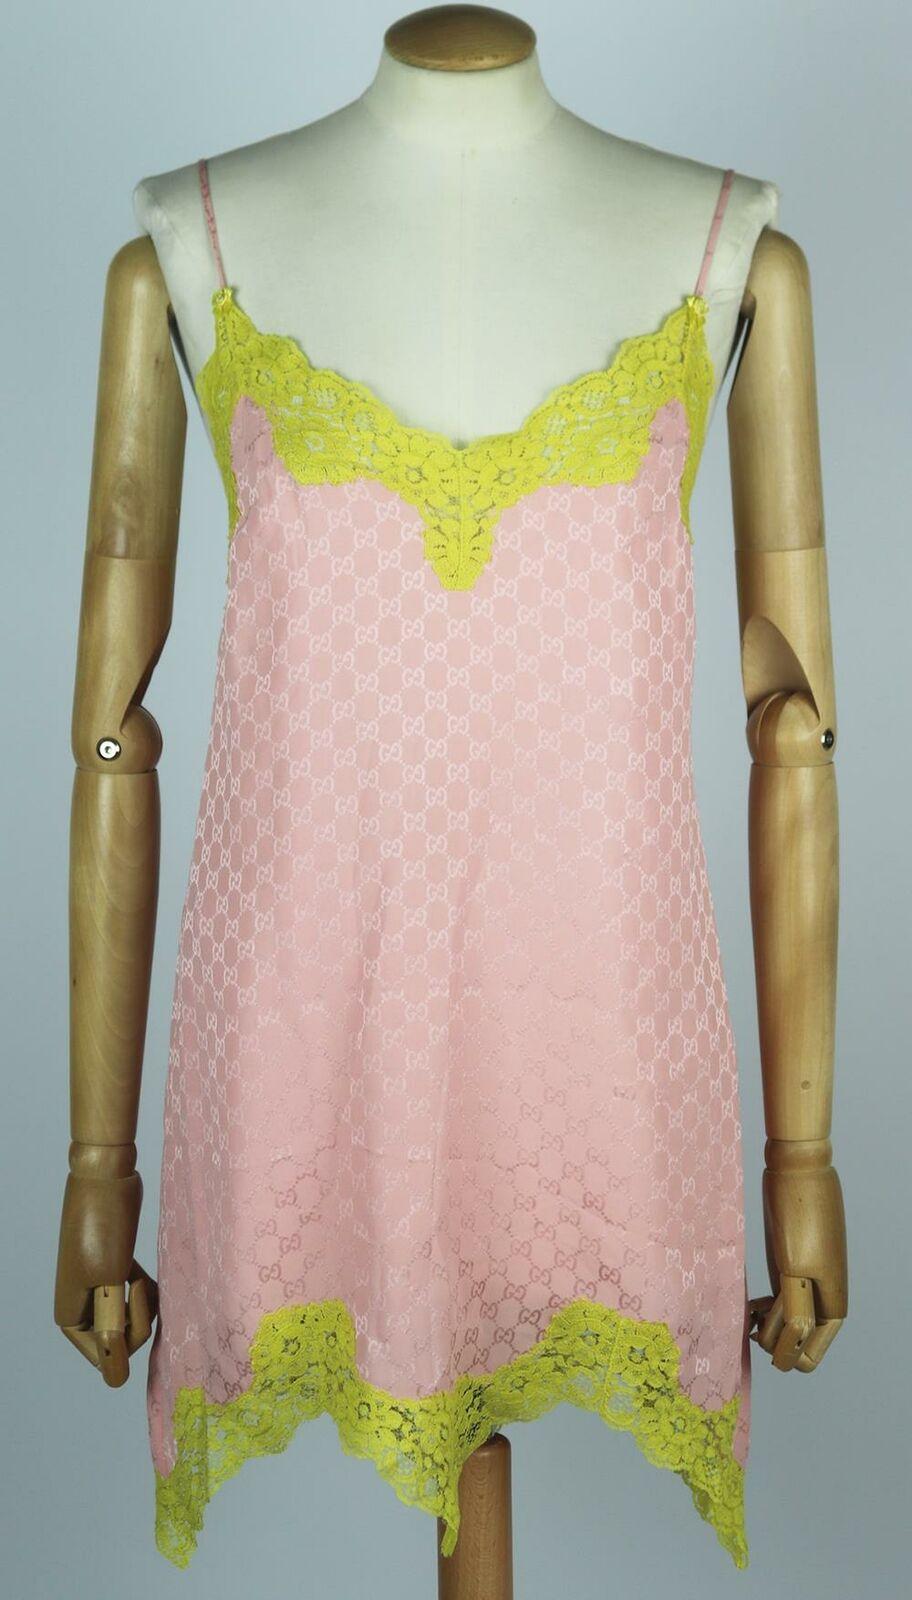 Gucci's Resort '20 collection is filled with lingerie-inspired pieces, like this mini dress, cut from luxurious silk that's embroidered with the house's iconic 'GG' monogram, it has dainty lace trim and pin-thin shoulder straps
Pink silk, yellow